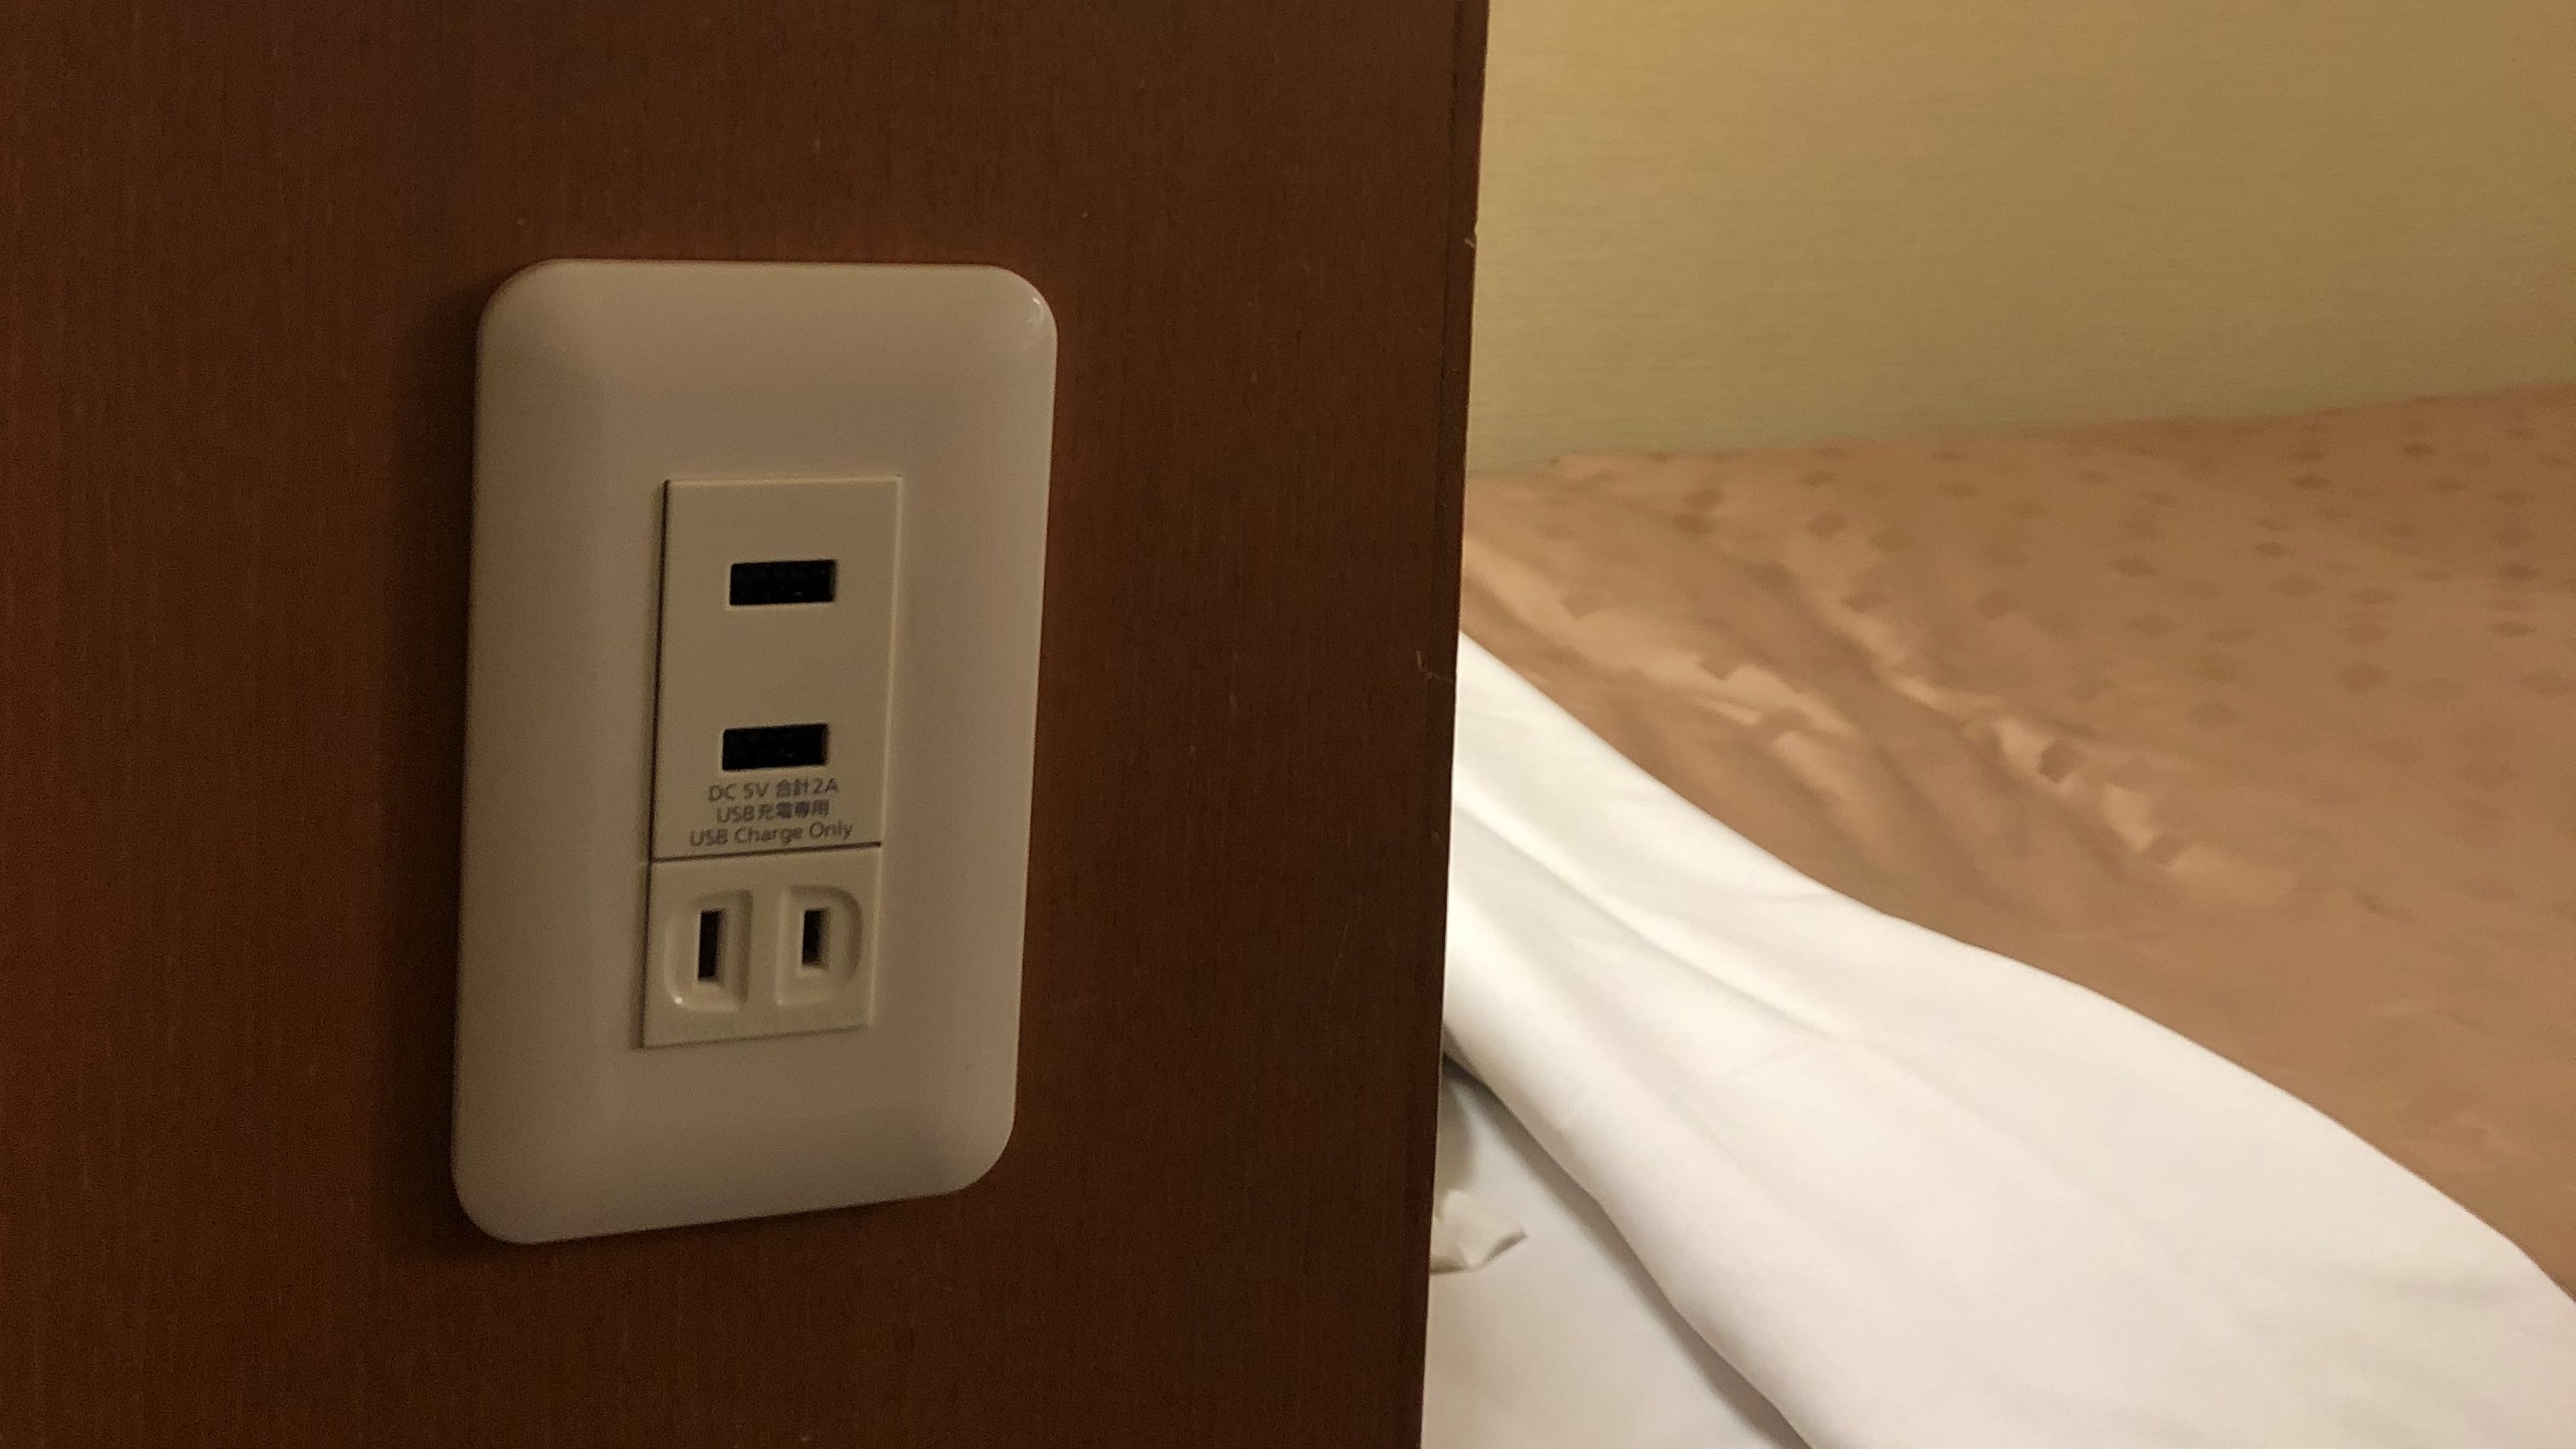 You can charge your smartphone at your bedside! We have installed an outlet and a USB port on the side of the bed ♪